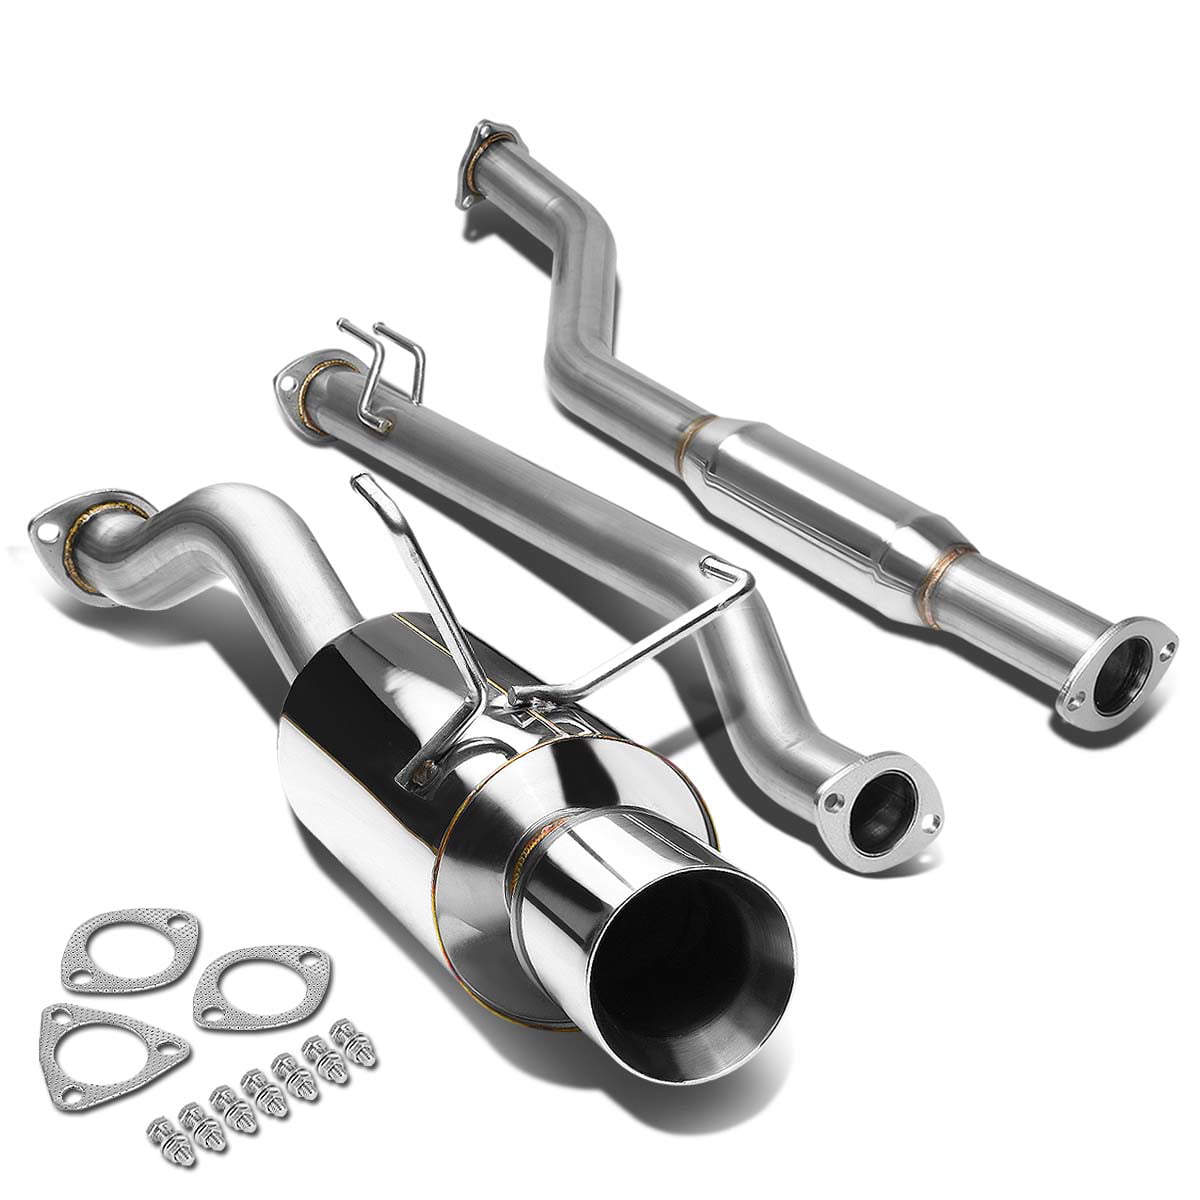 C-ONE Shiwan Ractis NCP / SCP 100 Stainless Muffler, Exhaust Systems